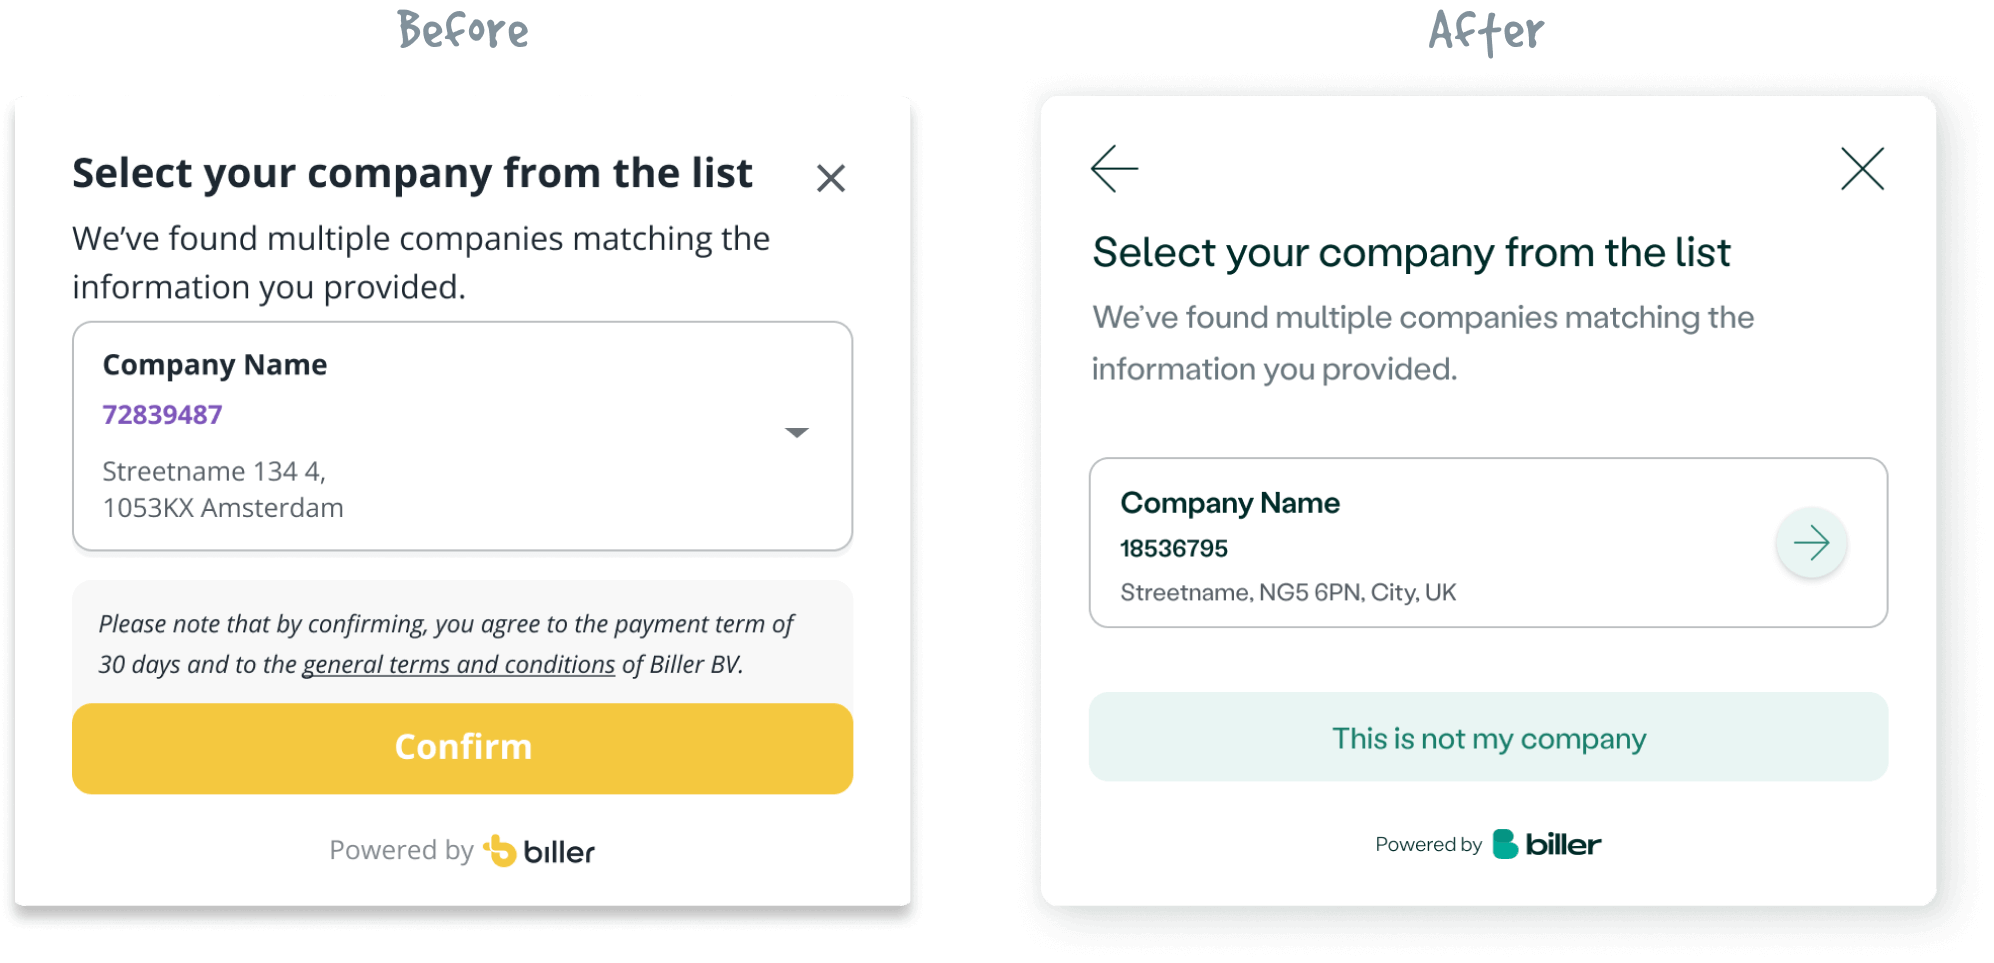 Company list before and after